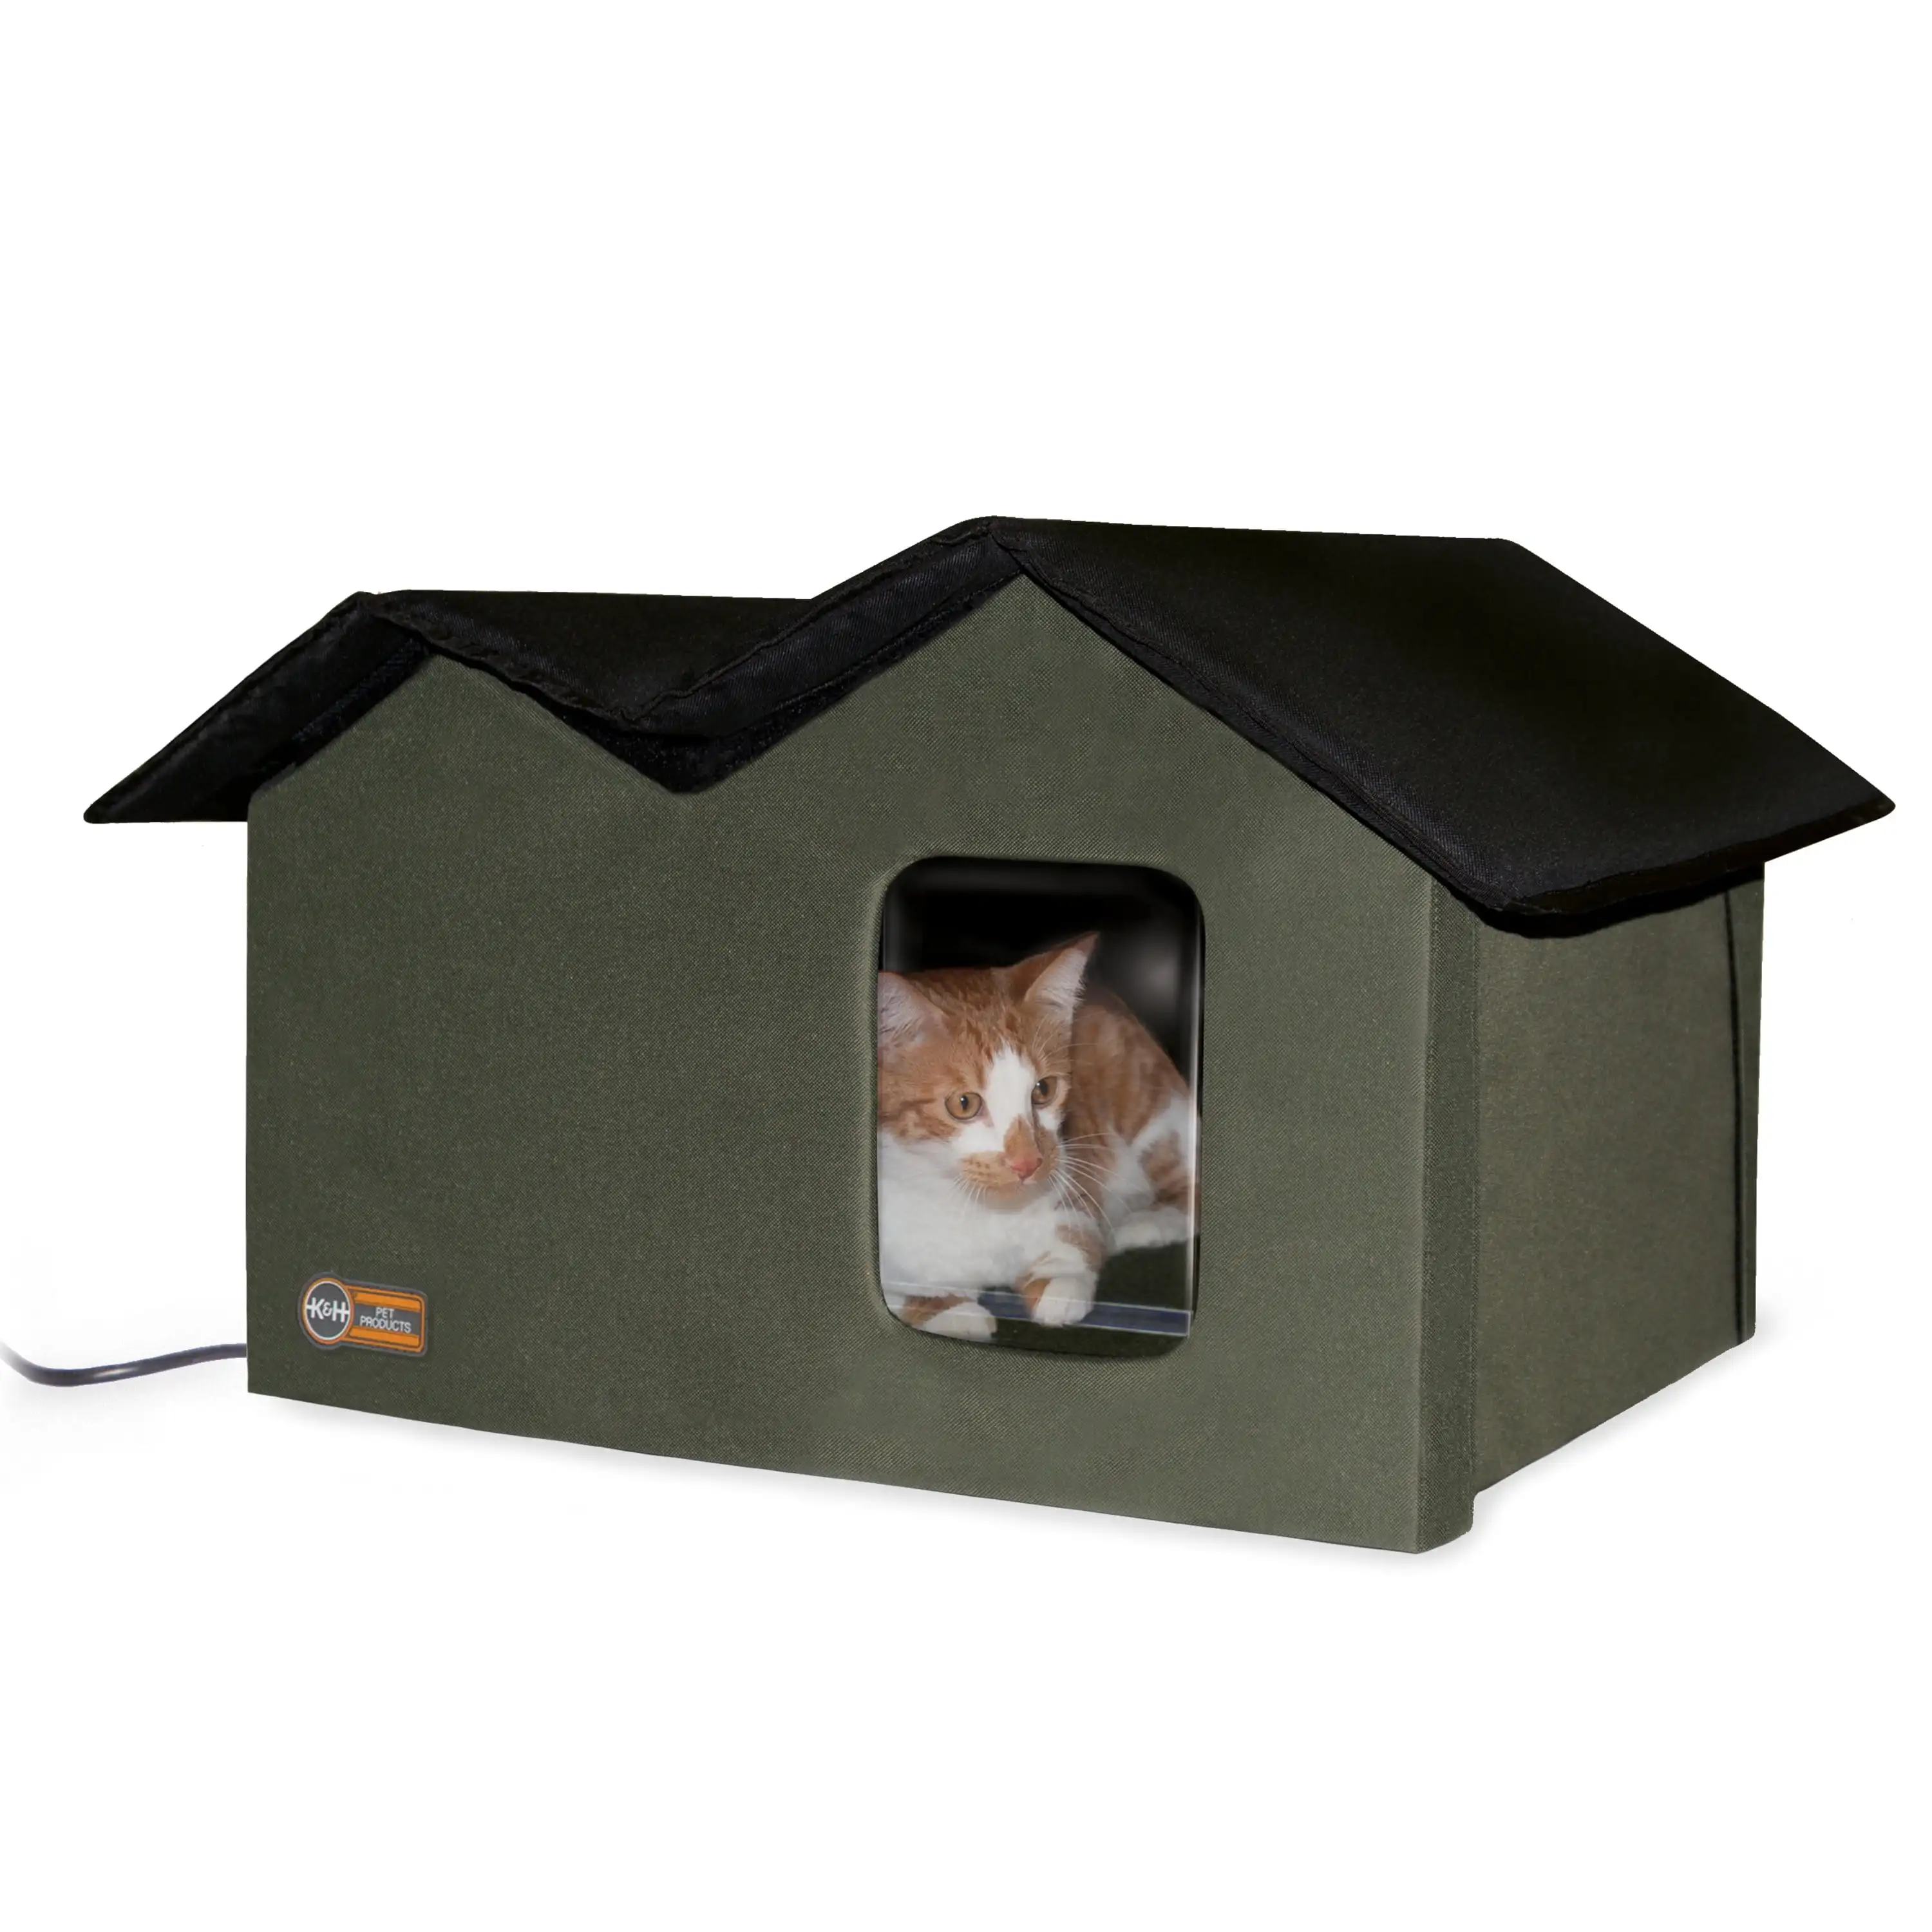 

K&H Pet Products Outdoor Heated Kitty House for Cats, Extra-Wide Olive/Black